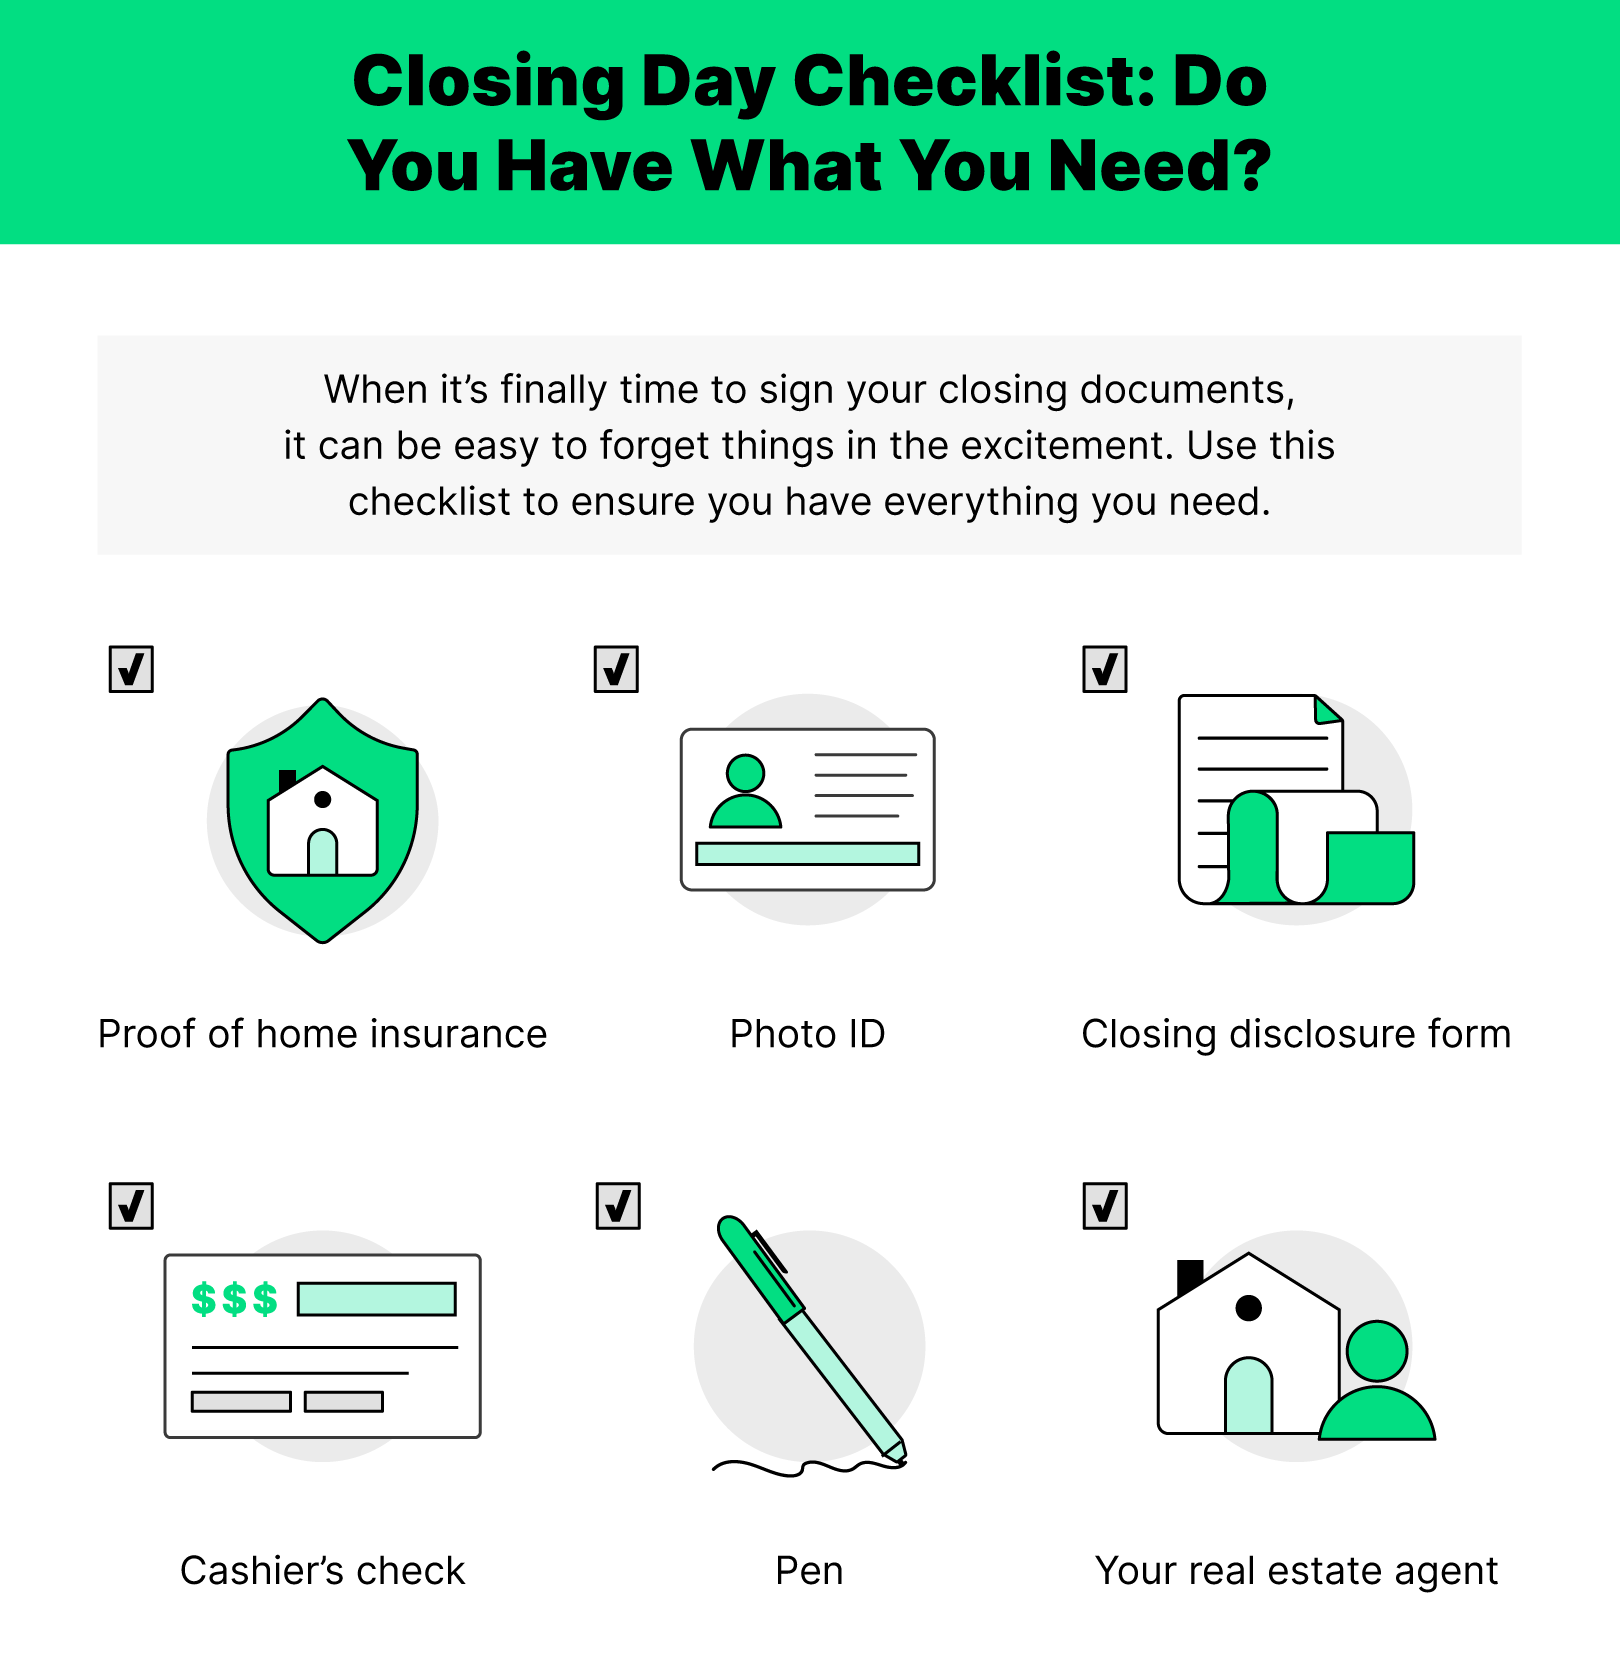 Illustrations of the things you need to bring to closing day